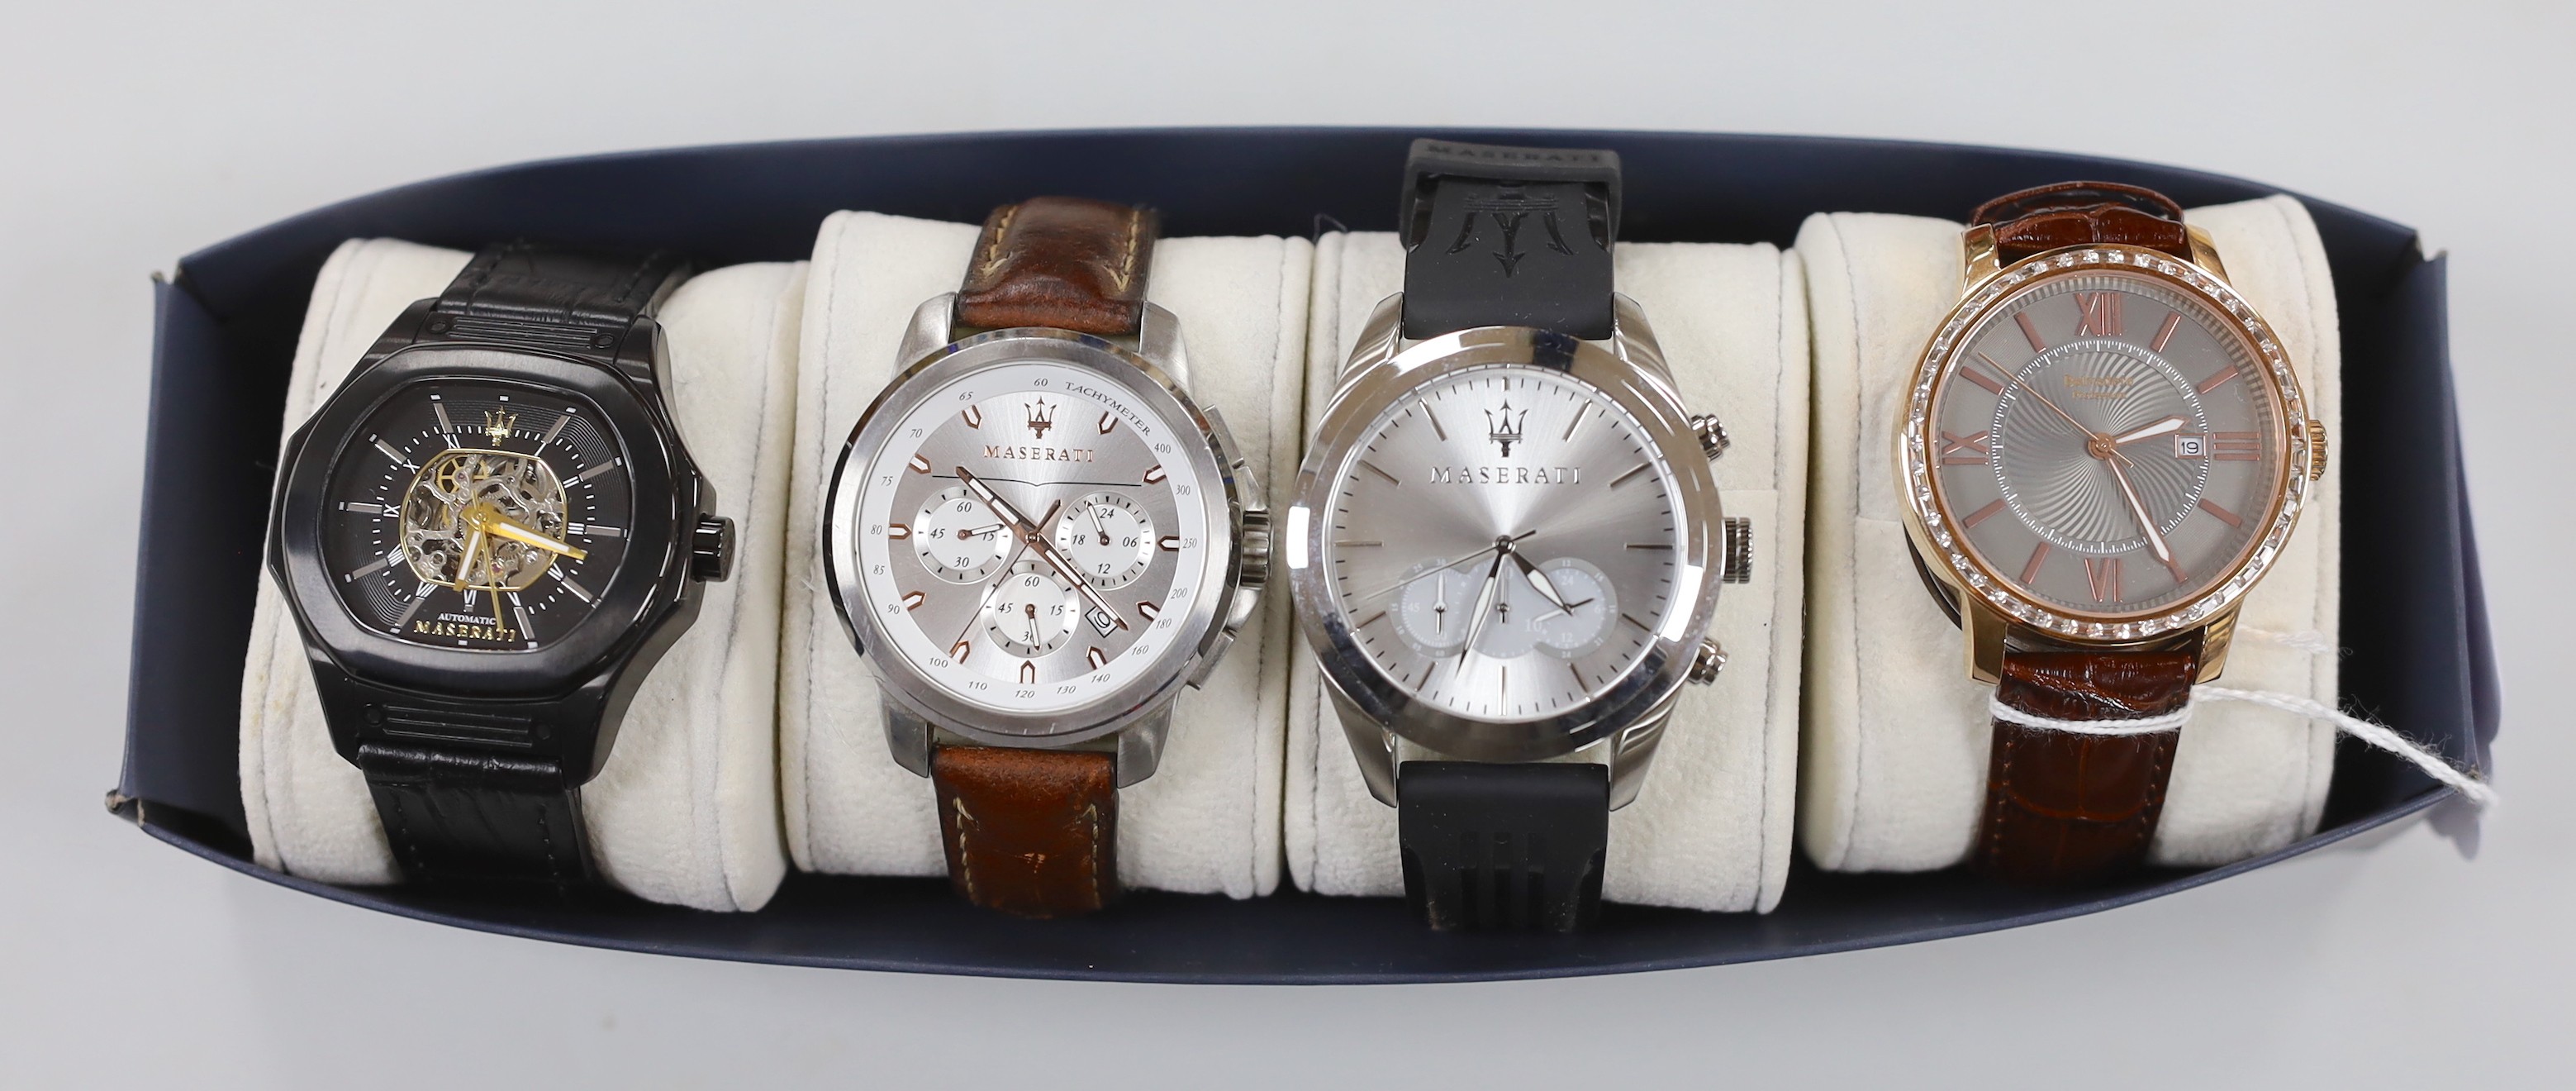 Three gentleman's assorted modern stainless steel Maserati wrist watches including automatic and quartz and a git metal Belvedere Profession watch.